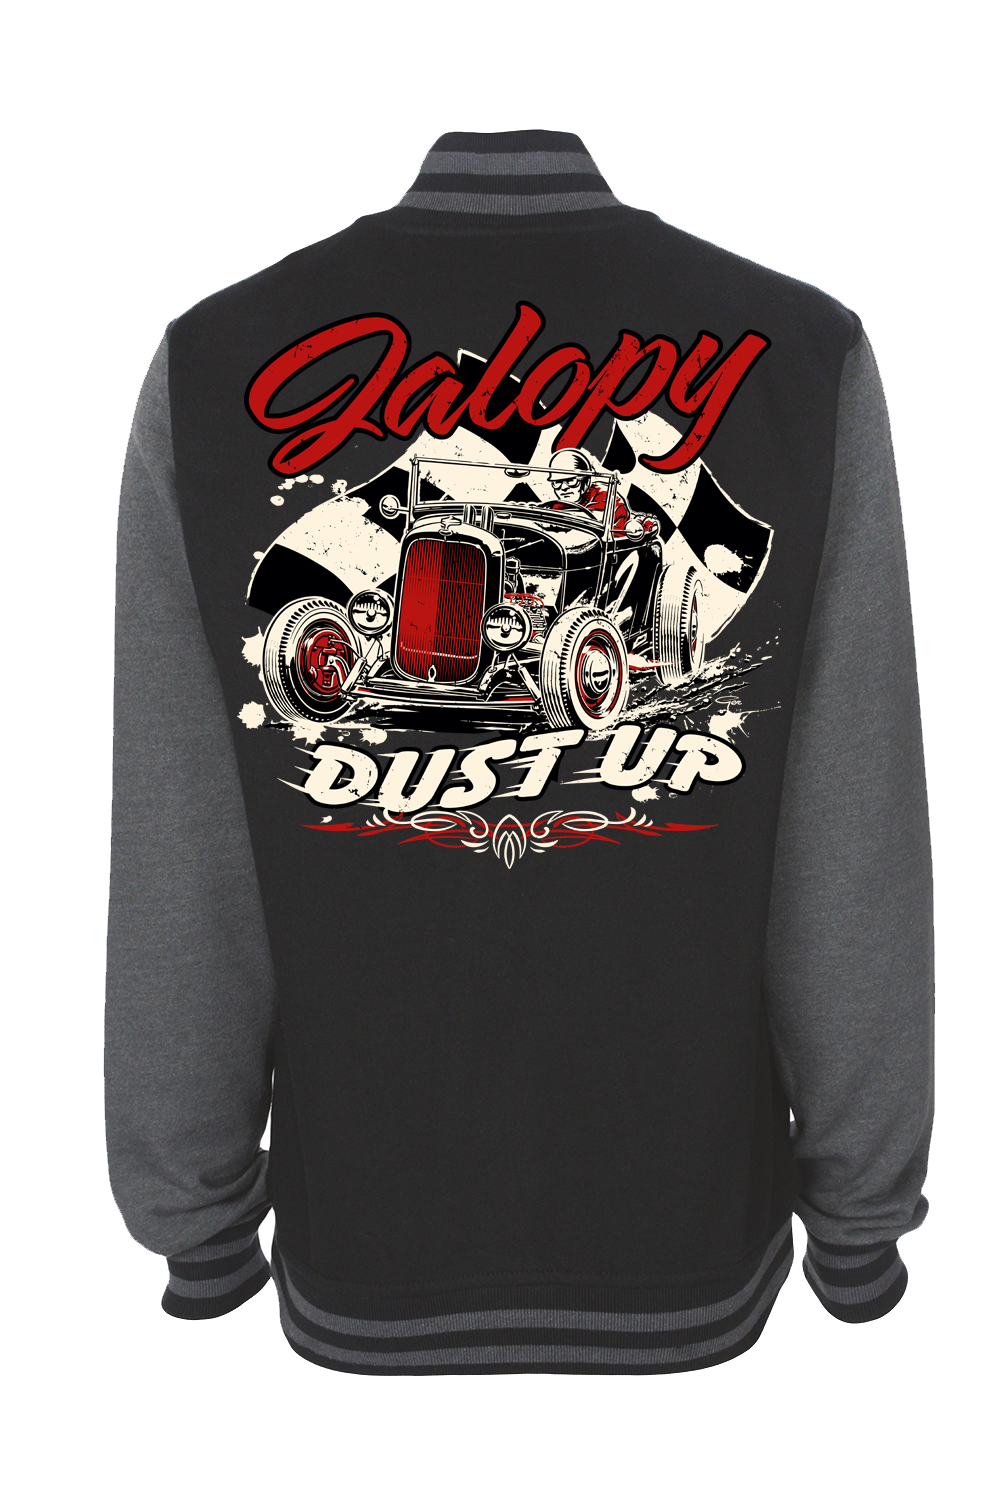 JALOPY DUST UP VARSITY JACKET UNISEX by Ger "Dutch Courage" Peters artwork